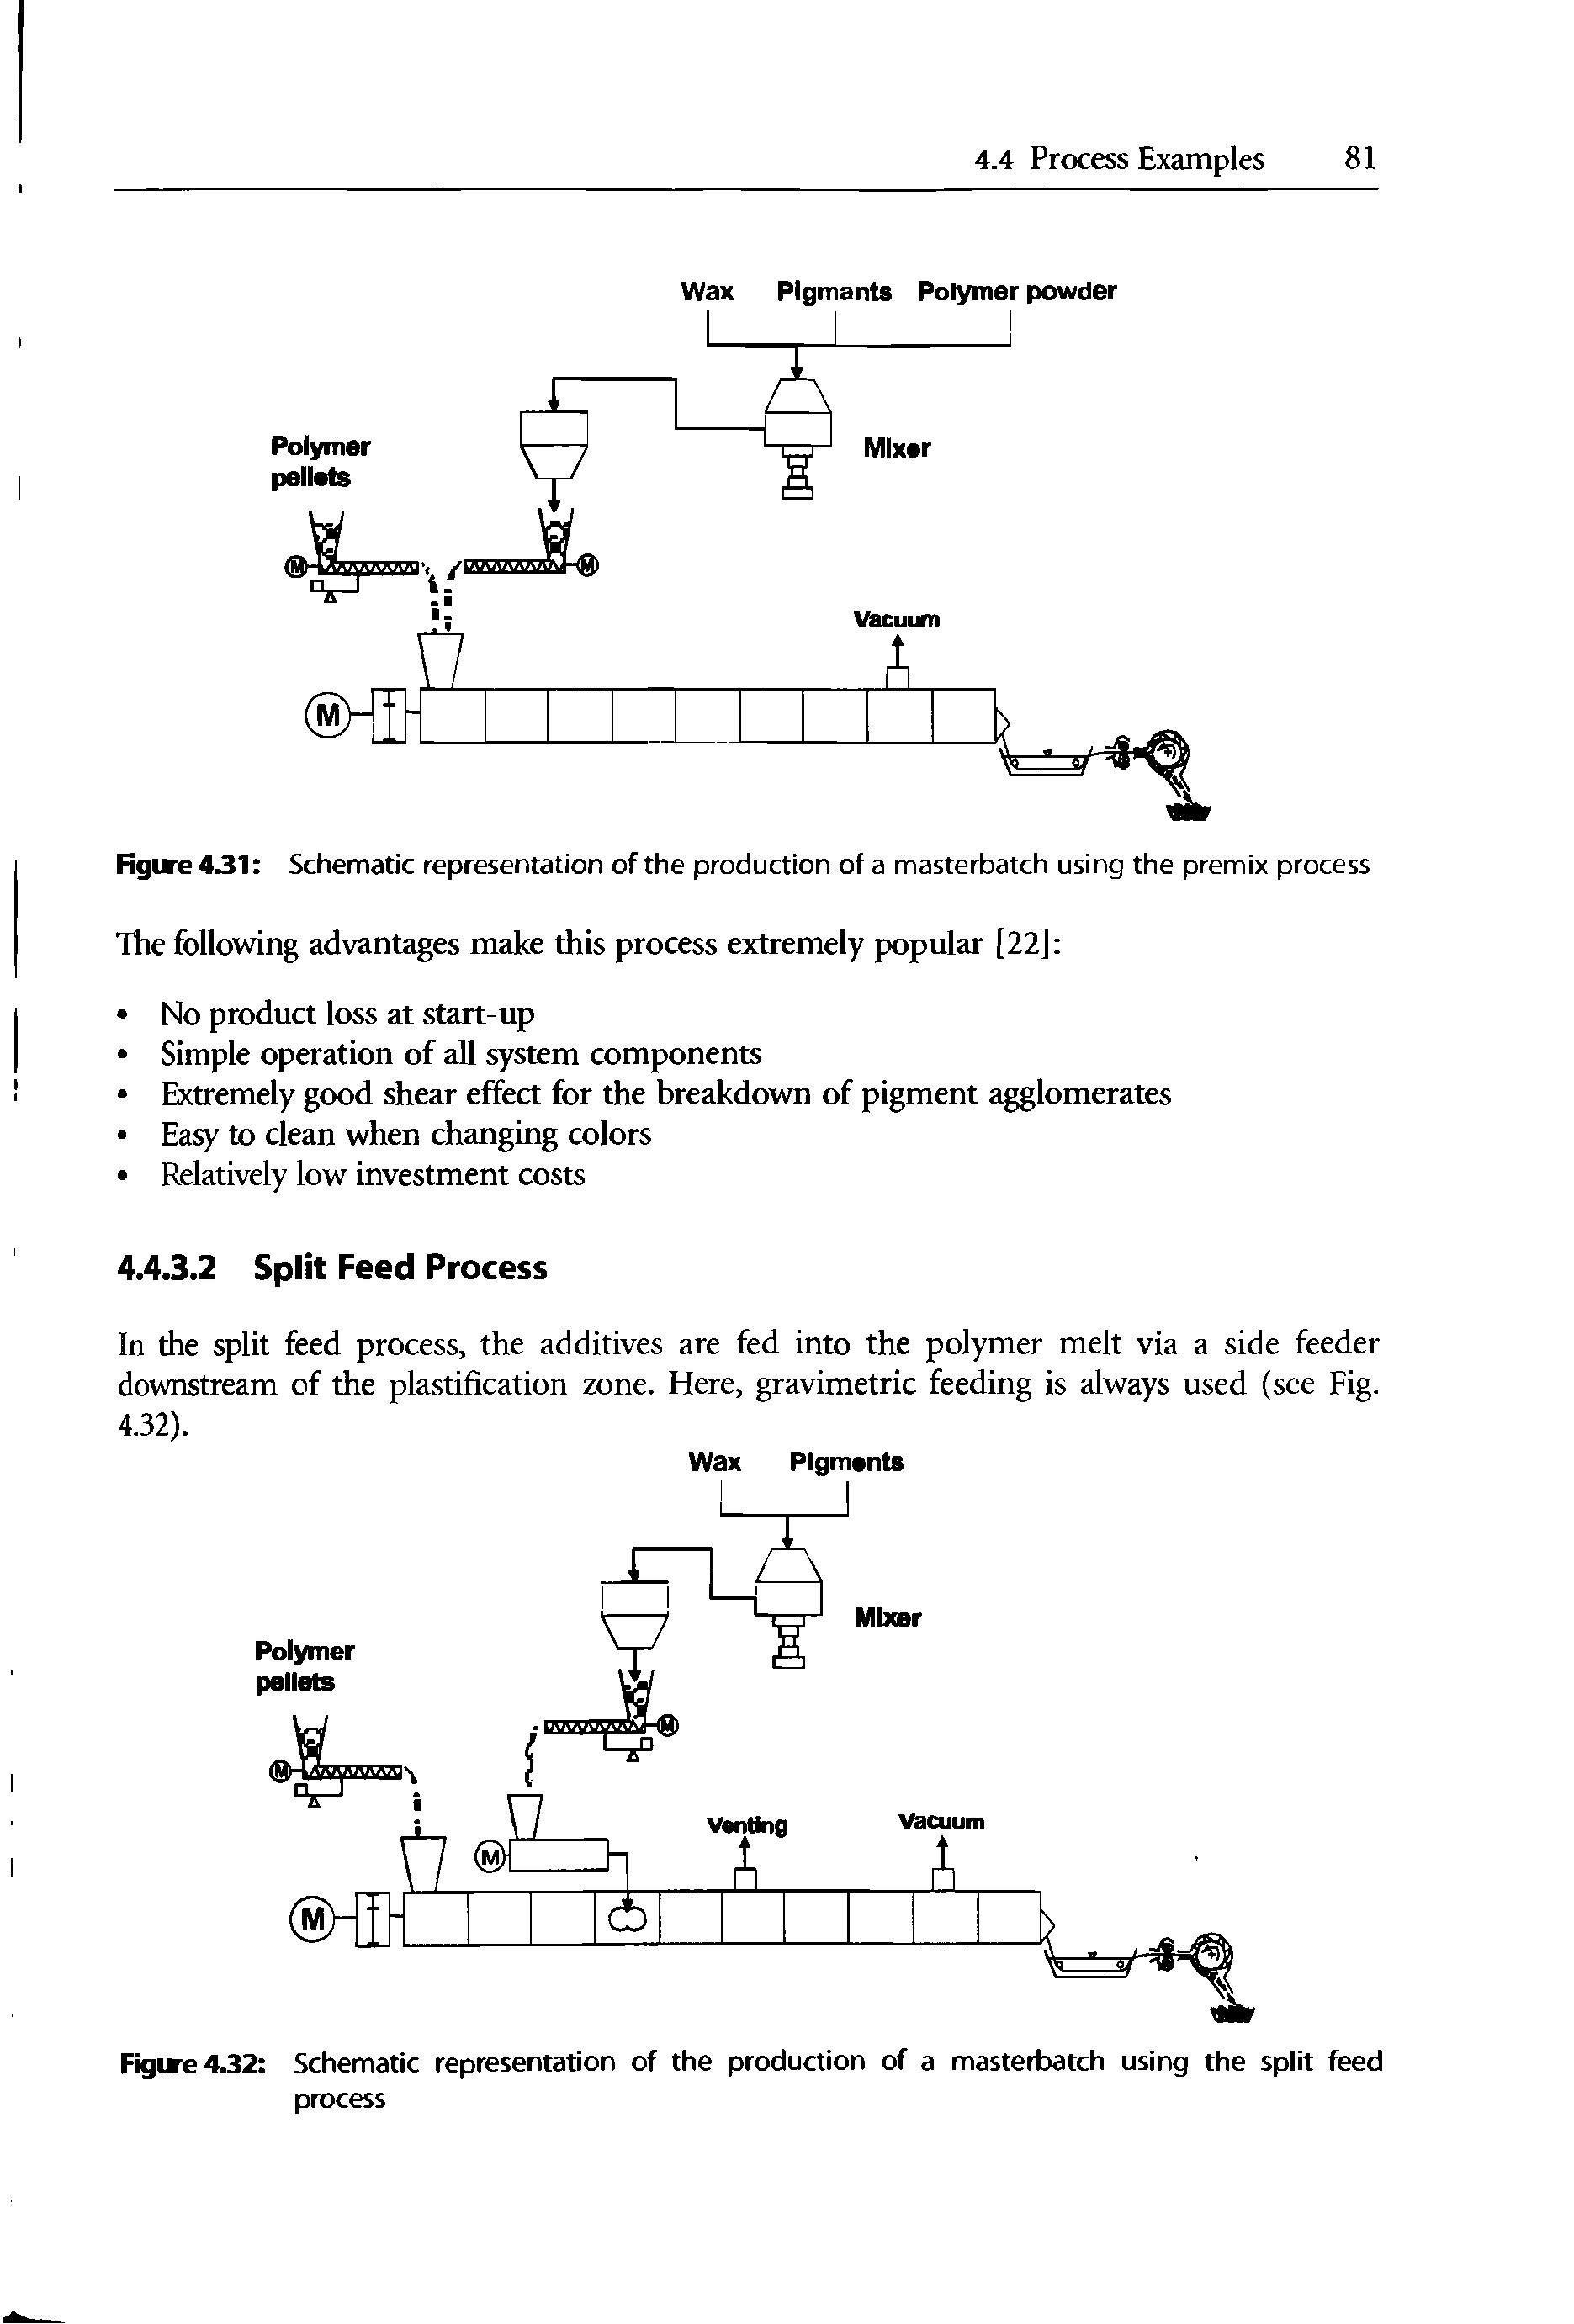 Figure 432 Schematic representation of the production of a masterbatch using the split feed process...